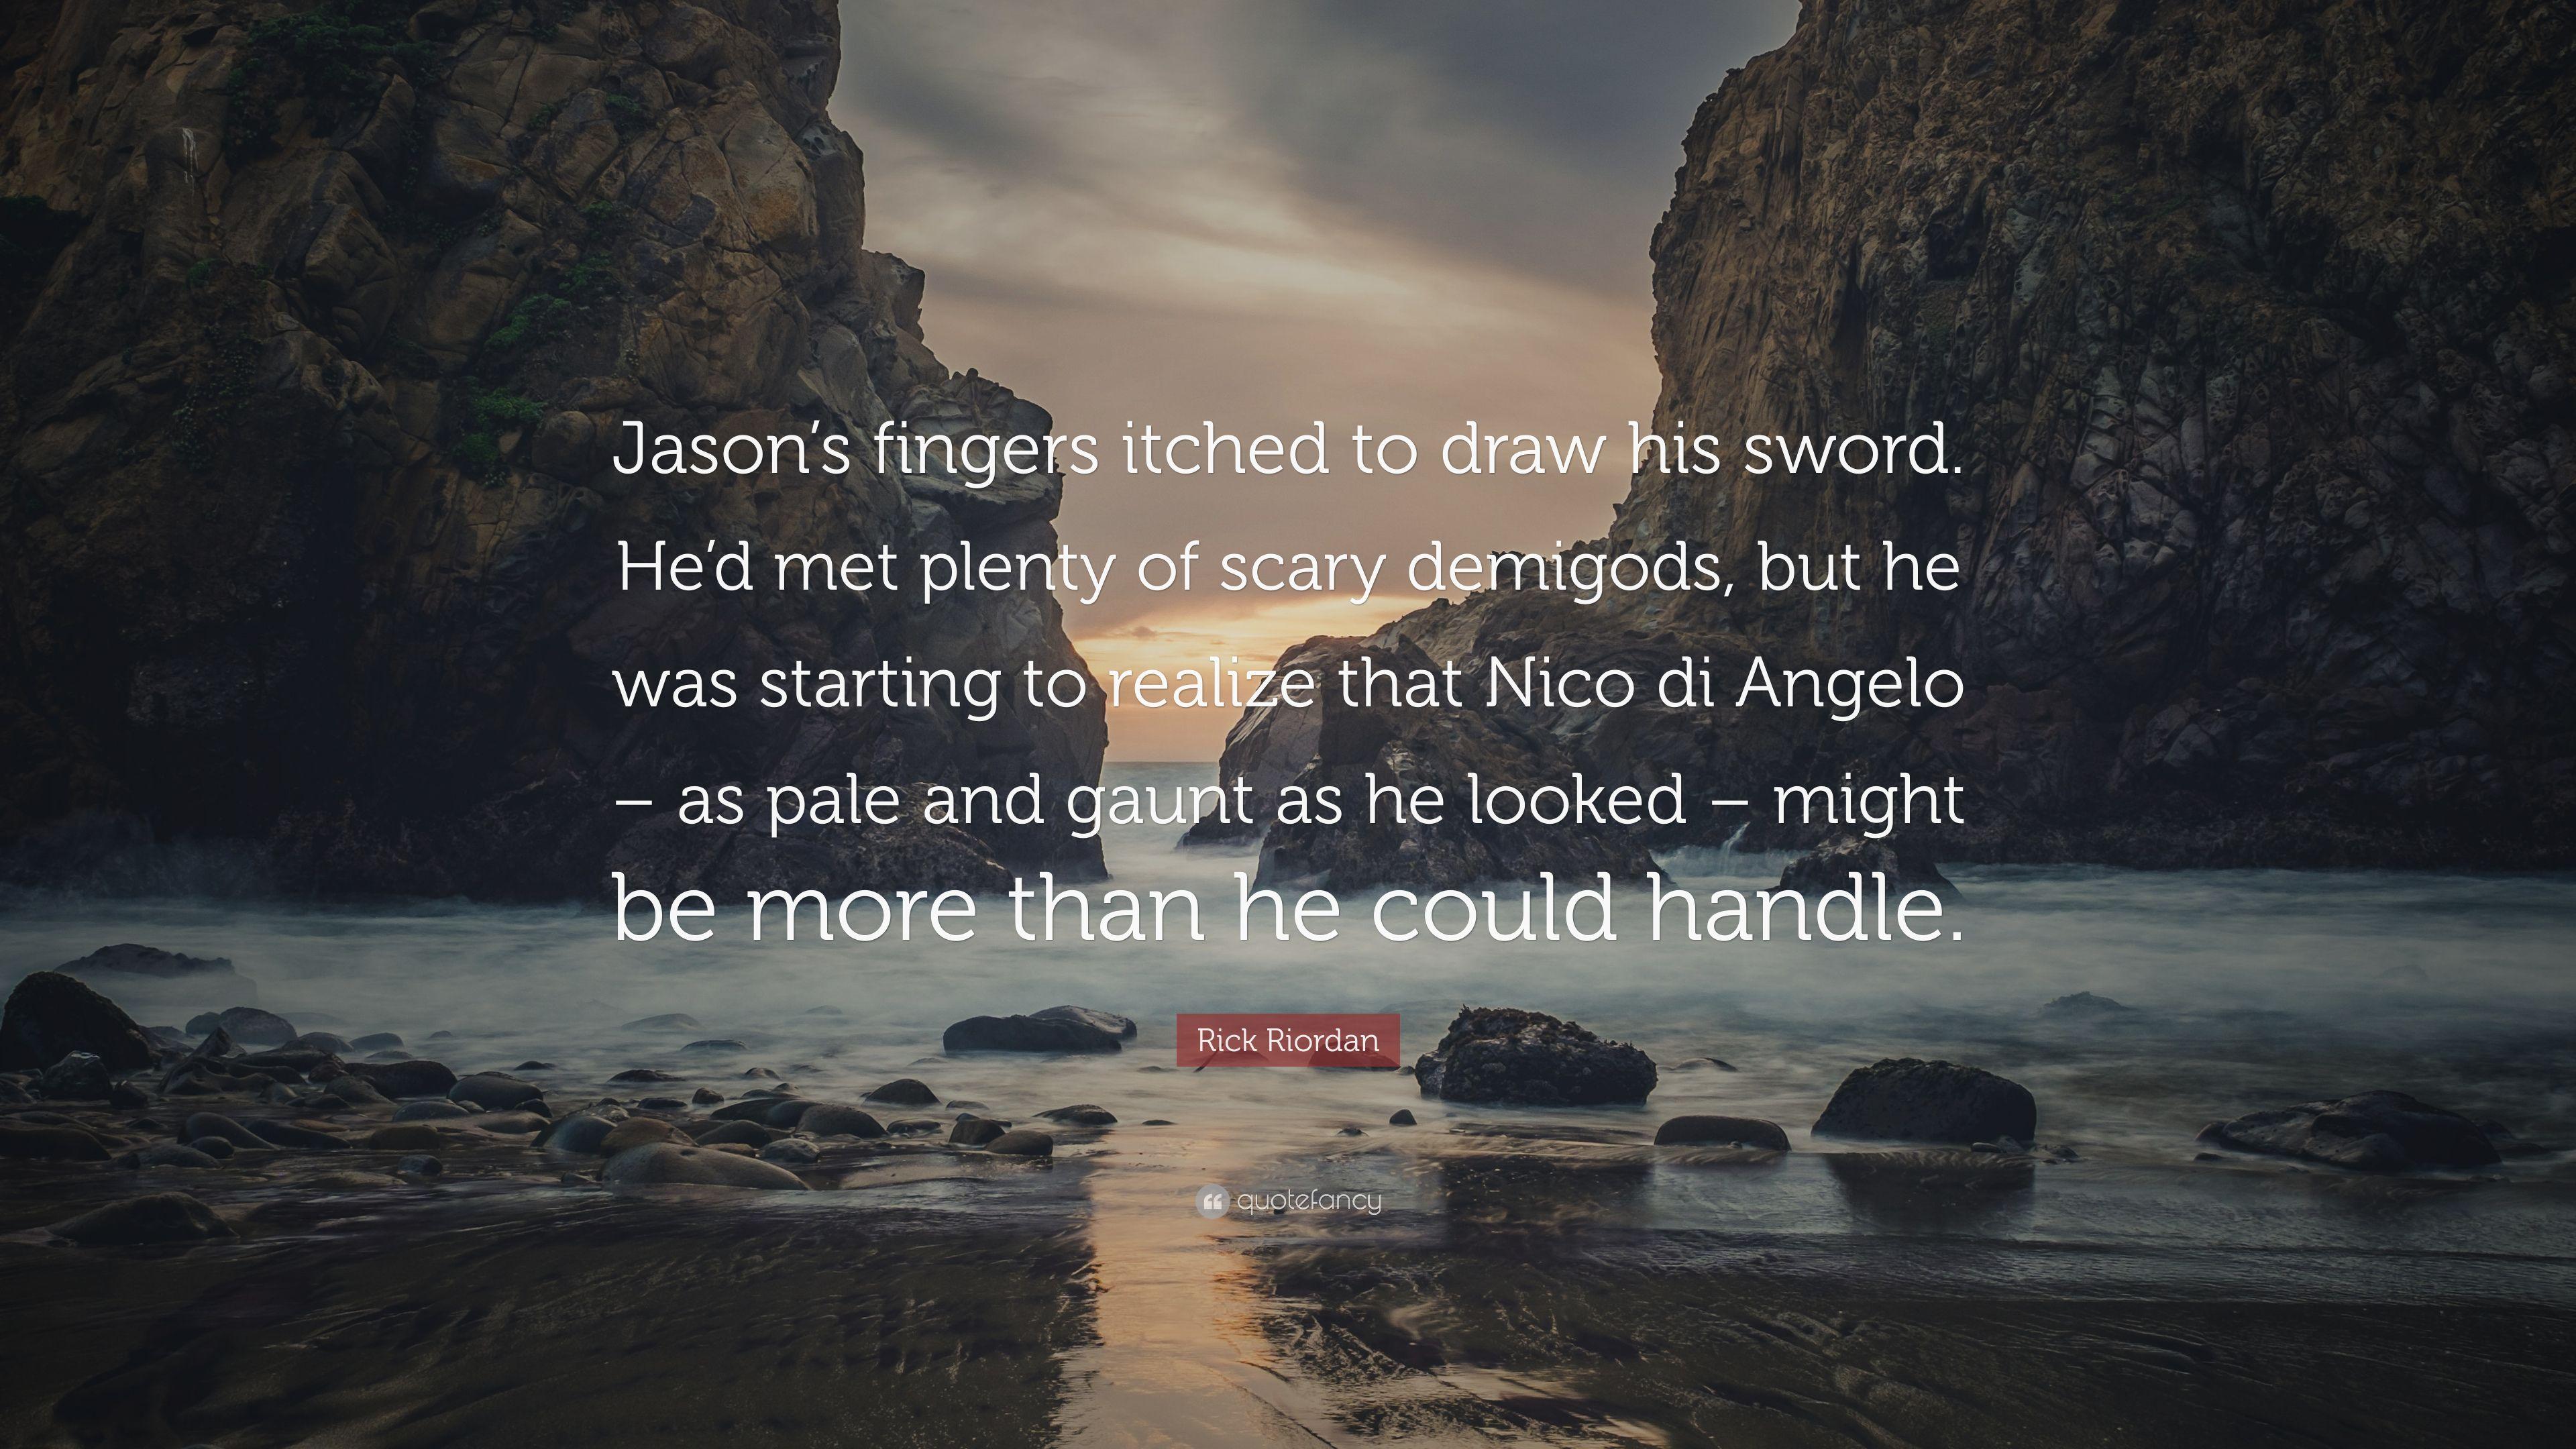 Rick Riordan Quote: “Jason's fingers itched to draw his sword. He'd